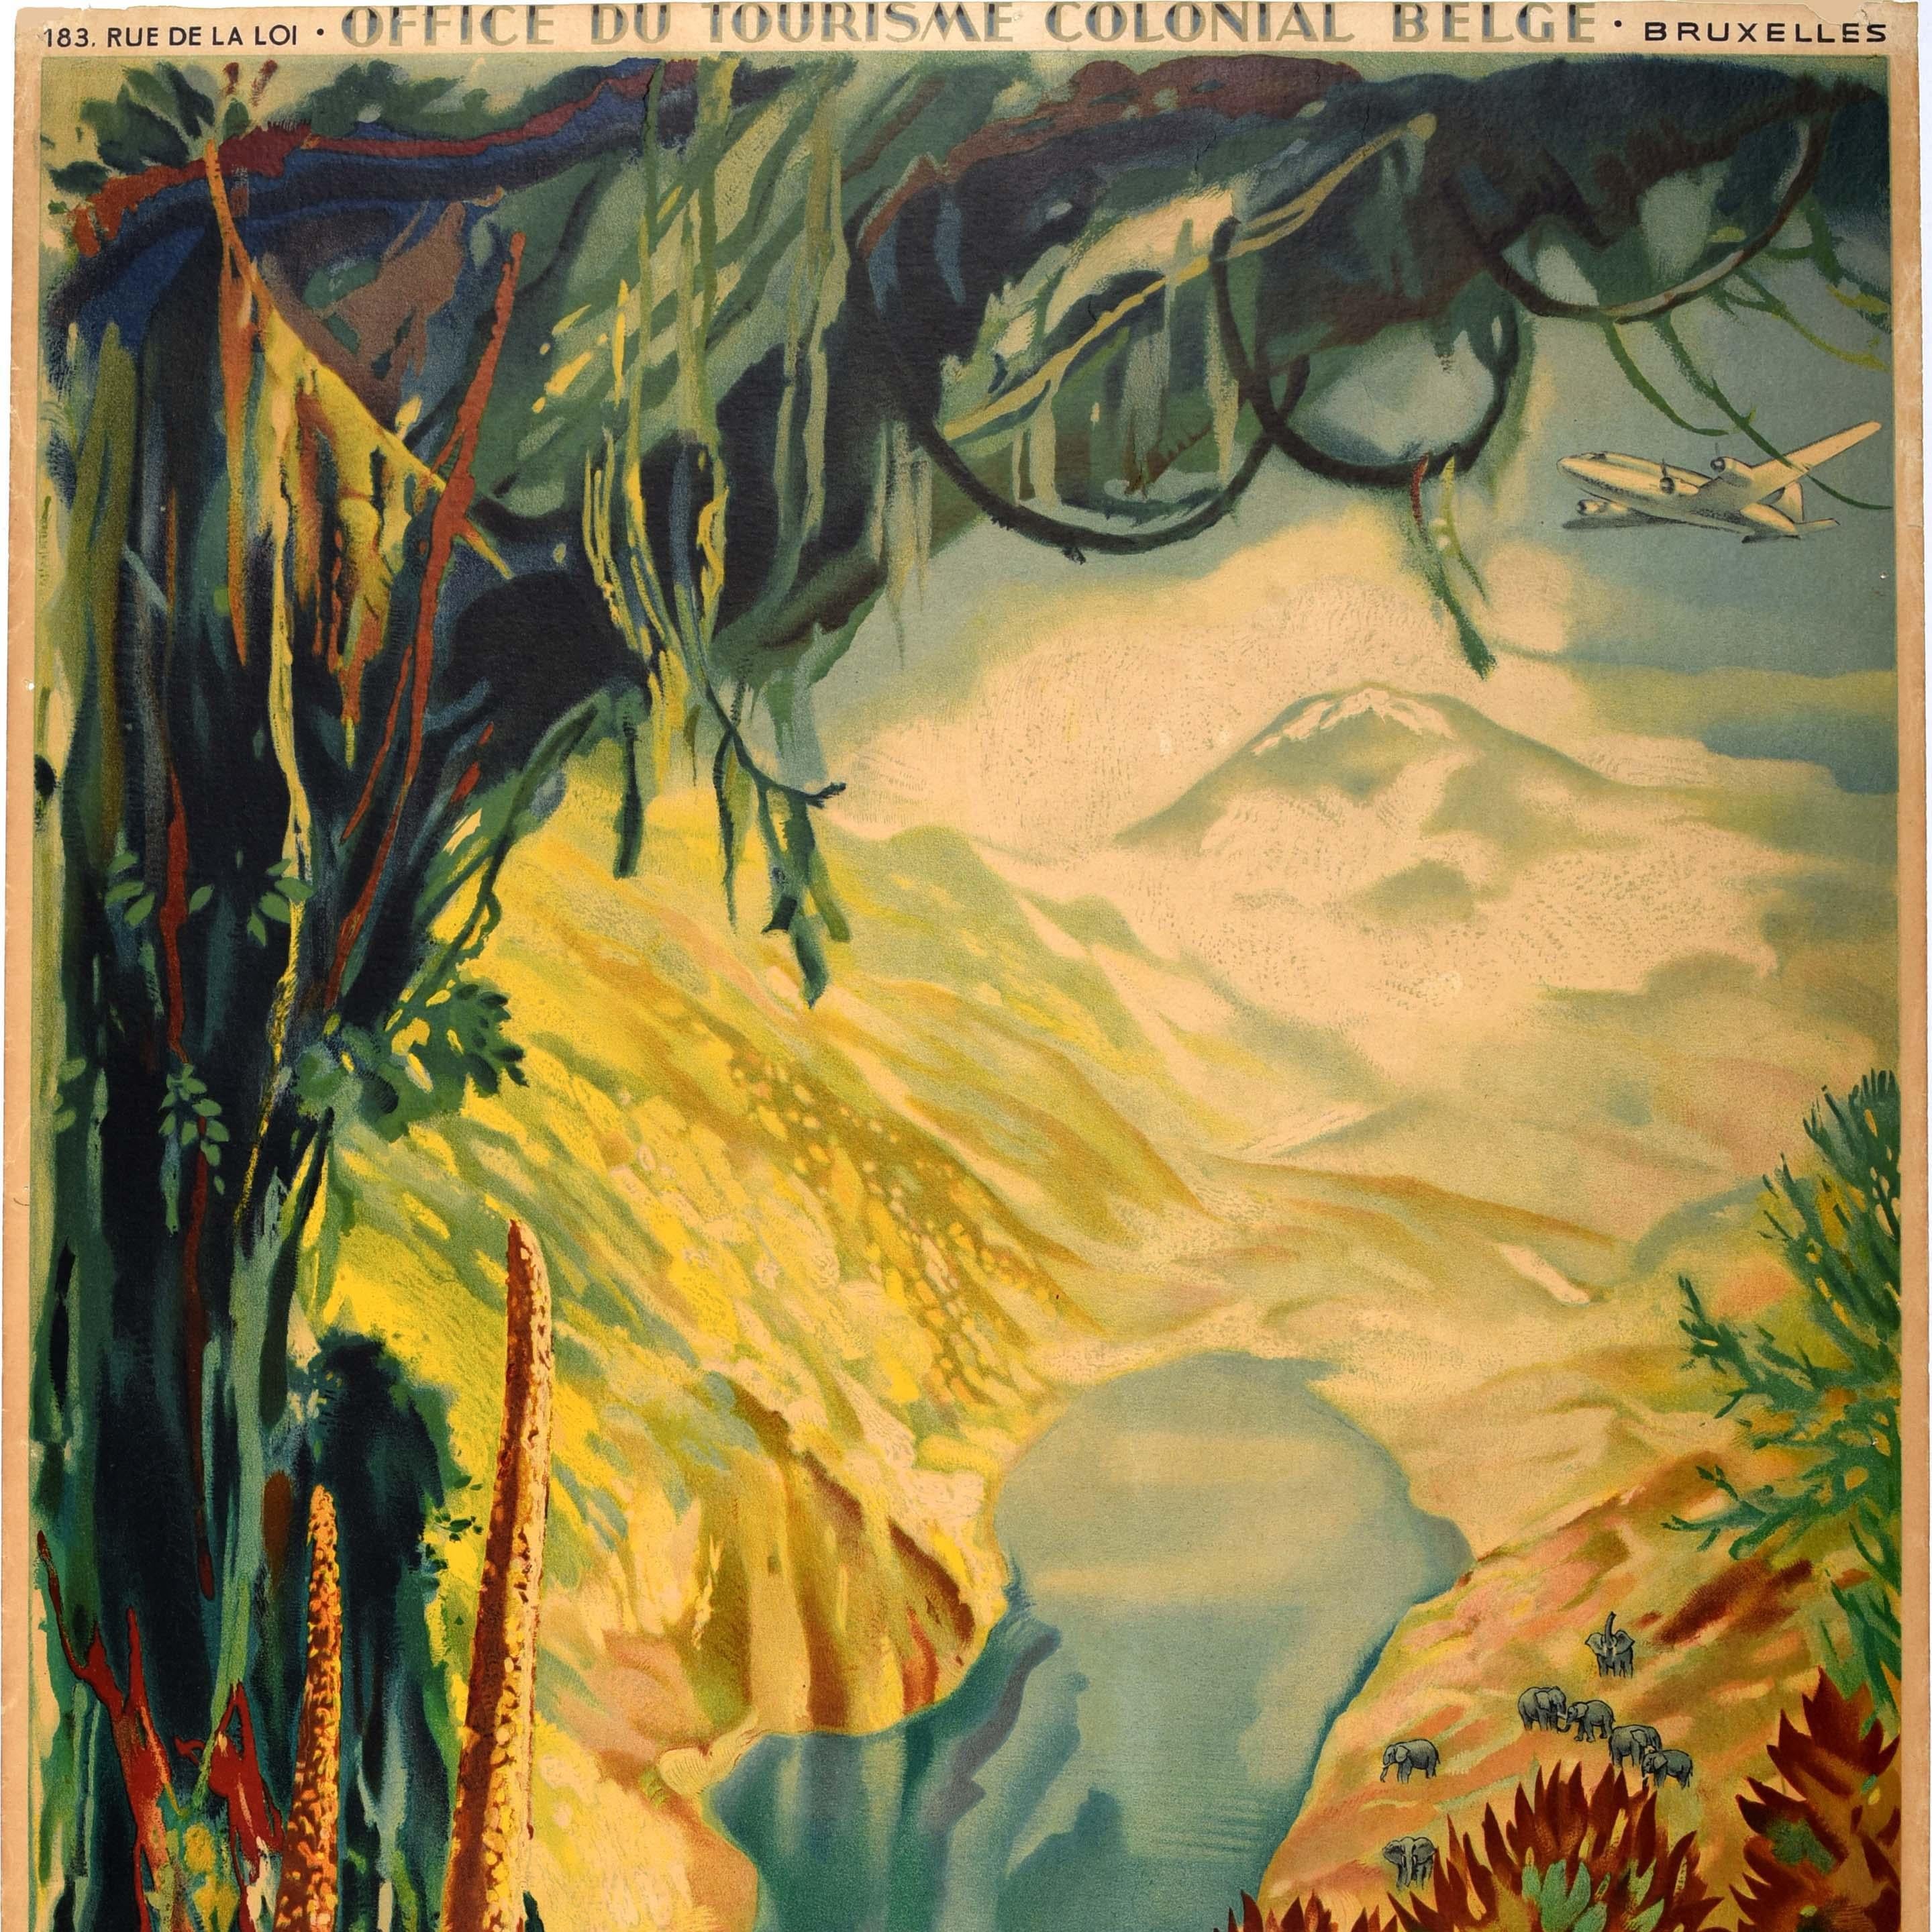 Original vintage Africa travel poster for the Congo issued by the Belgian Colonial Tourist Office / Office du Tourisme Colonial Belge featuring artwork by Jean van Noten (1903-1982) depicting a view of a plane flying over elephants by a lake with